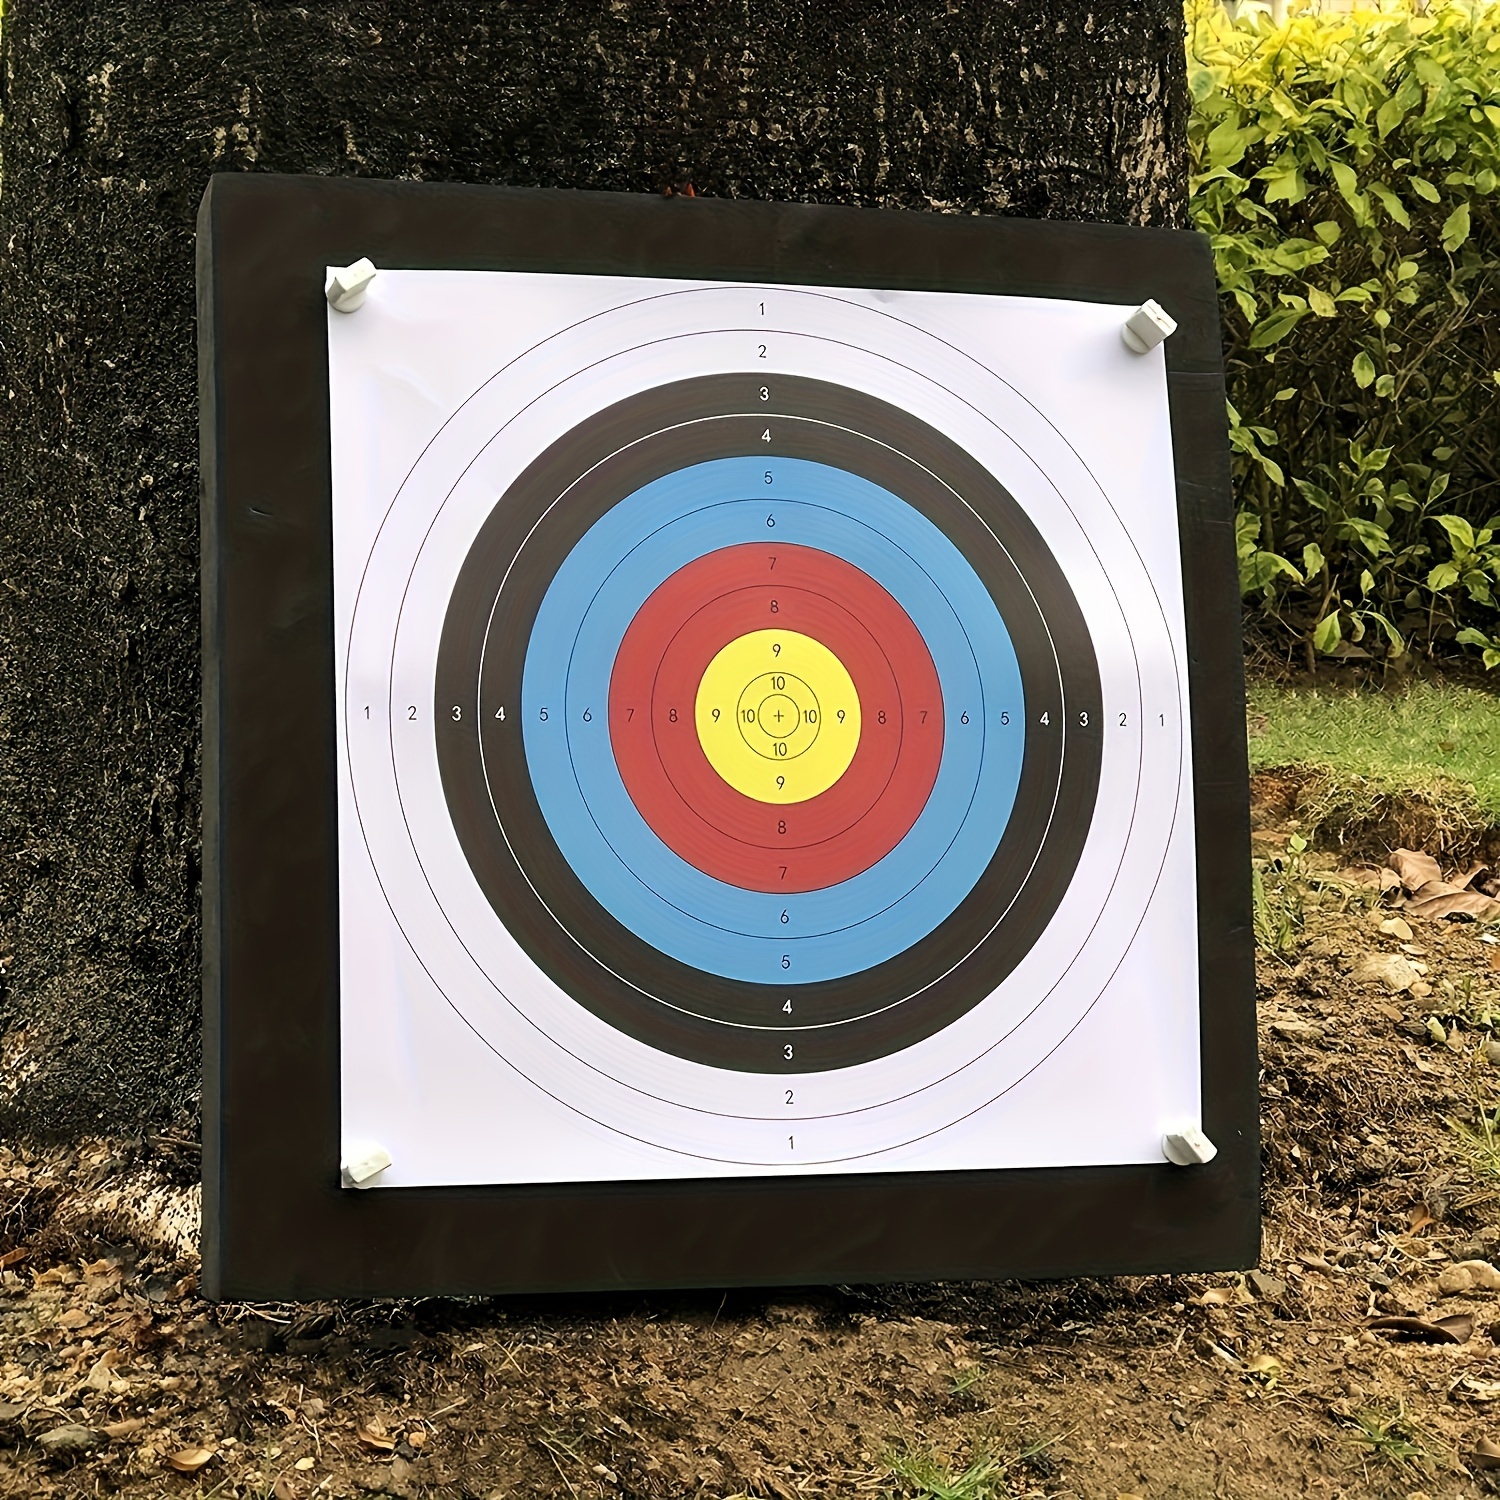 

30pcs Traditional Target Paper For Archery - Perfect For Practicing And Improving Accuracy